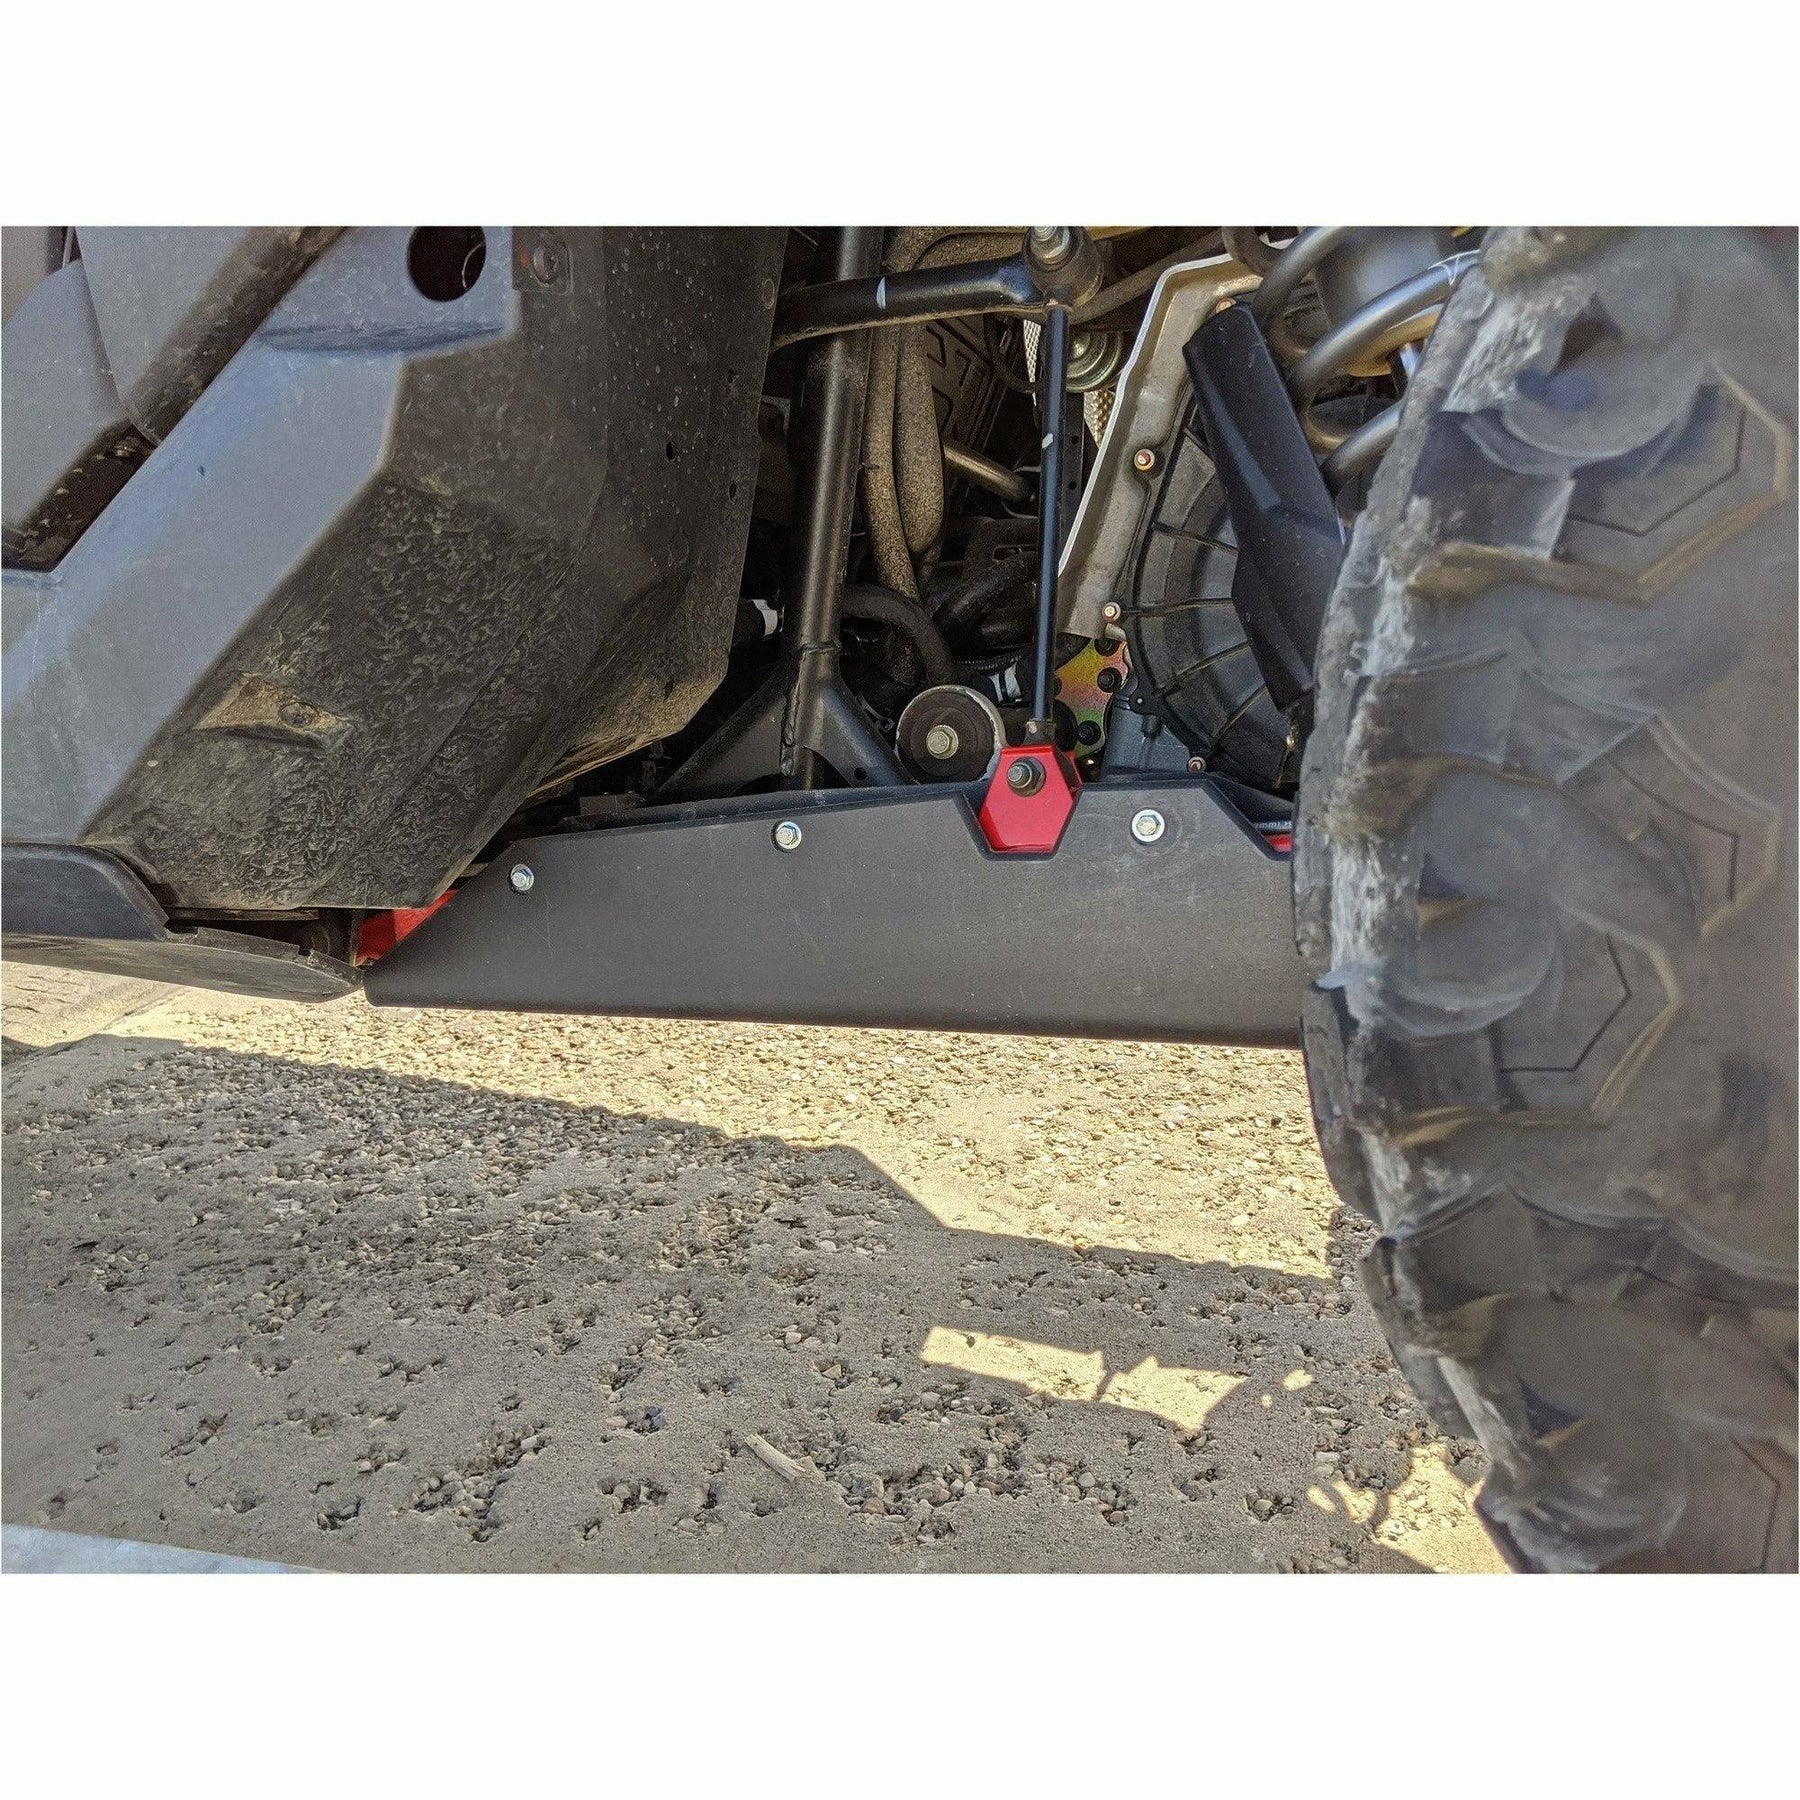 SSS Off-Road UHMW Arm Guards for Polaris RZR PRO XP 4